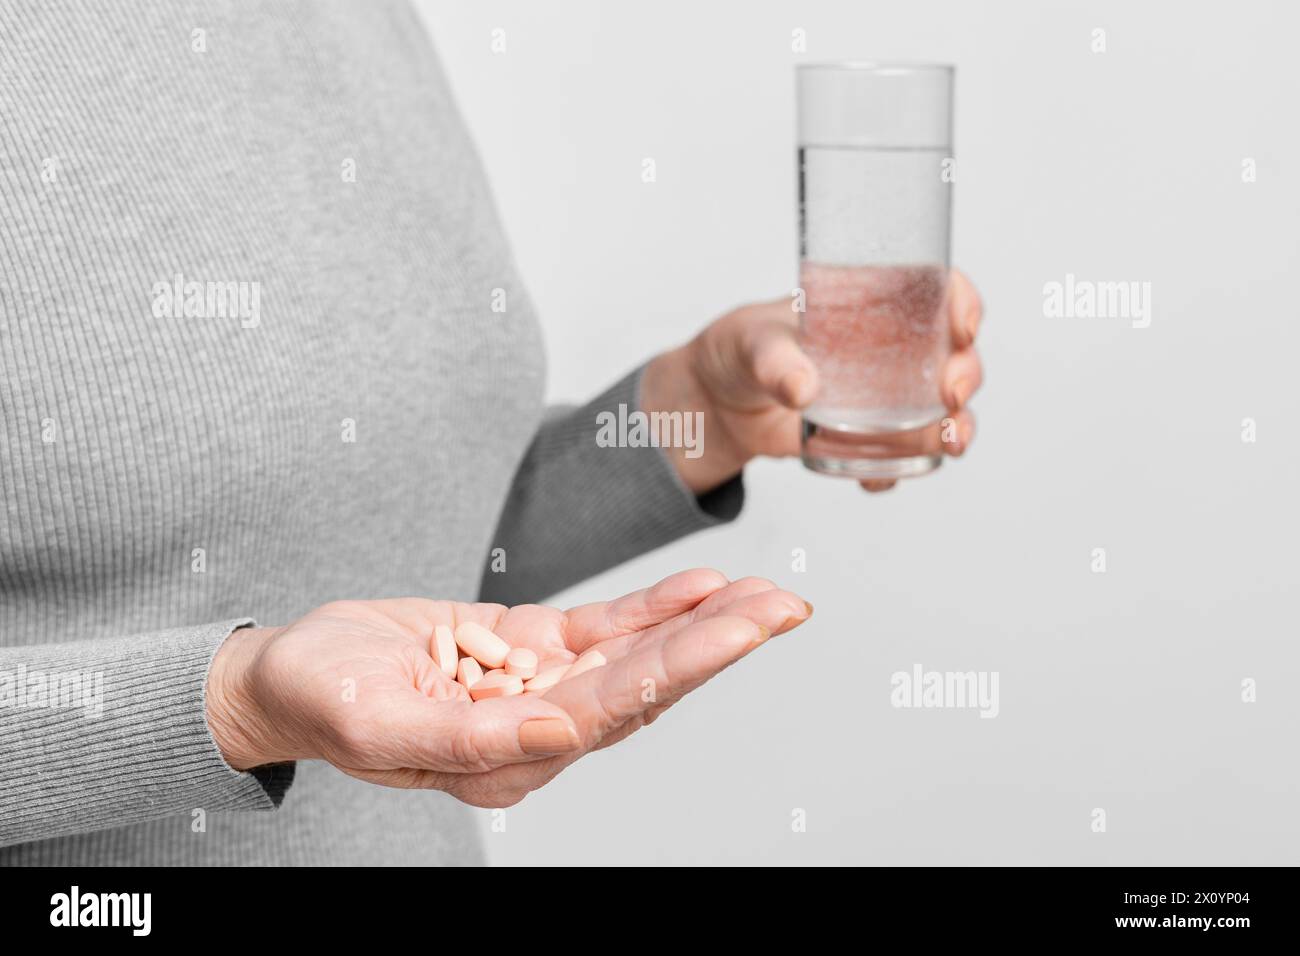 Senior holding pills and a glass of water Stock Photo